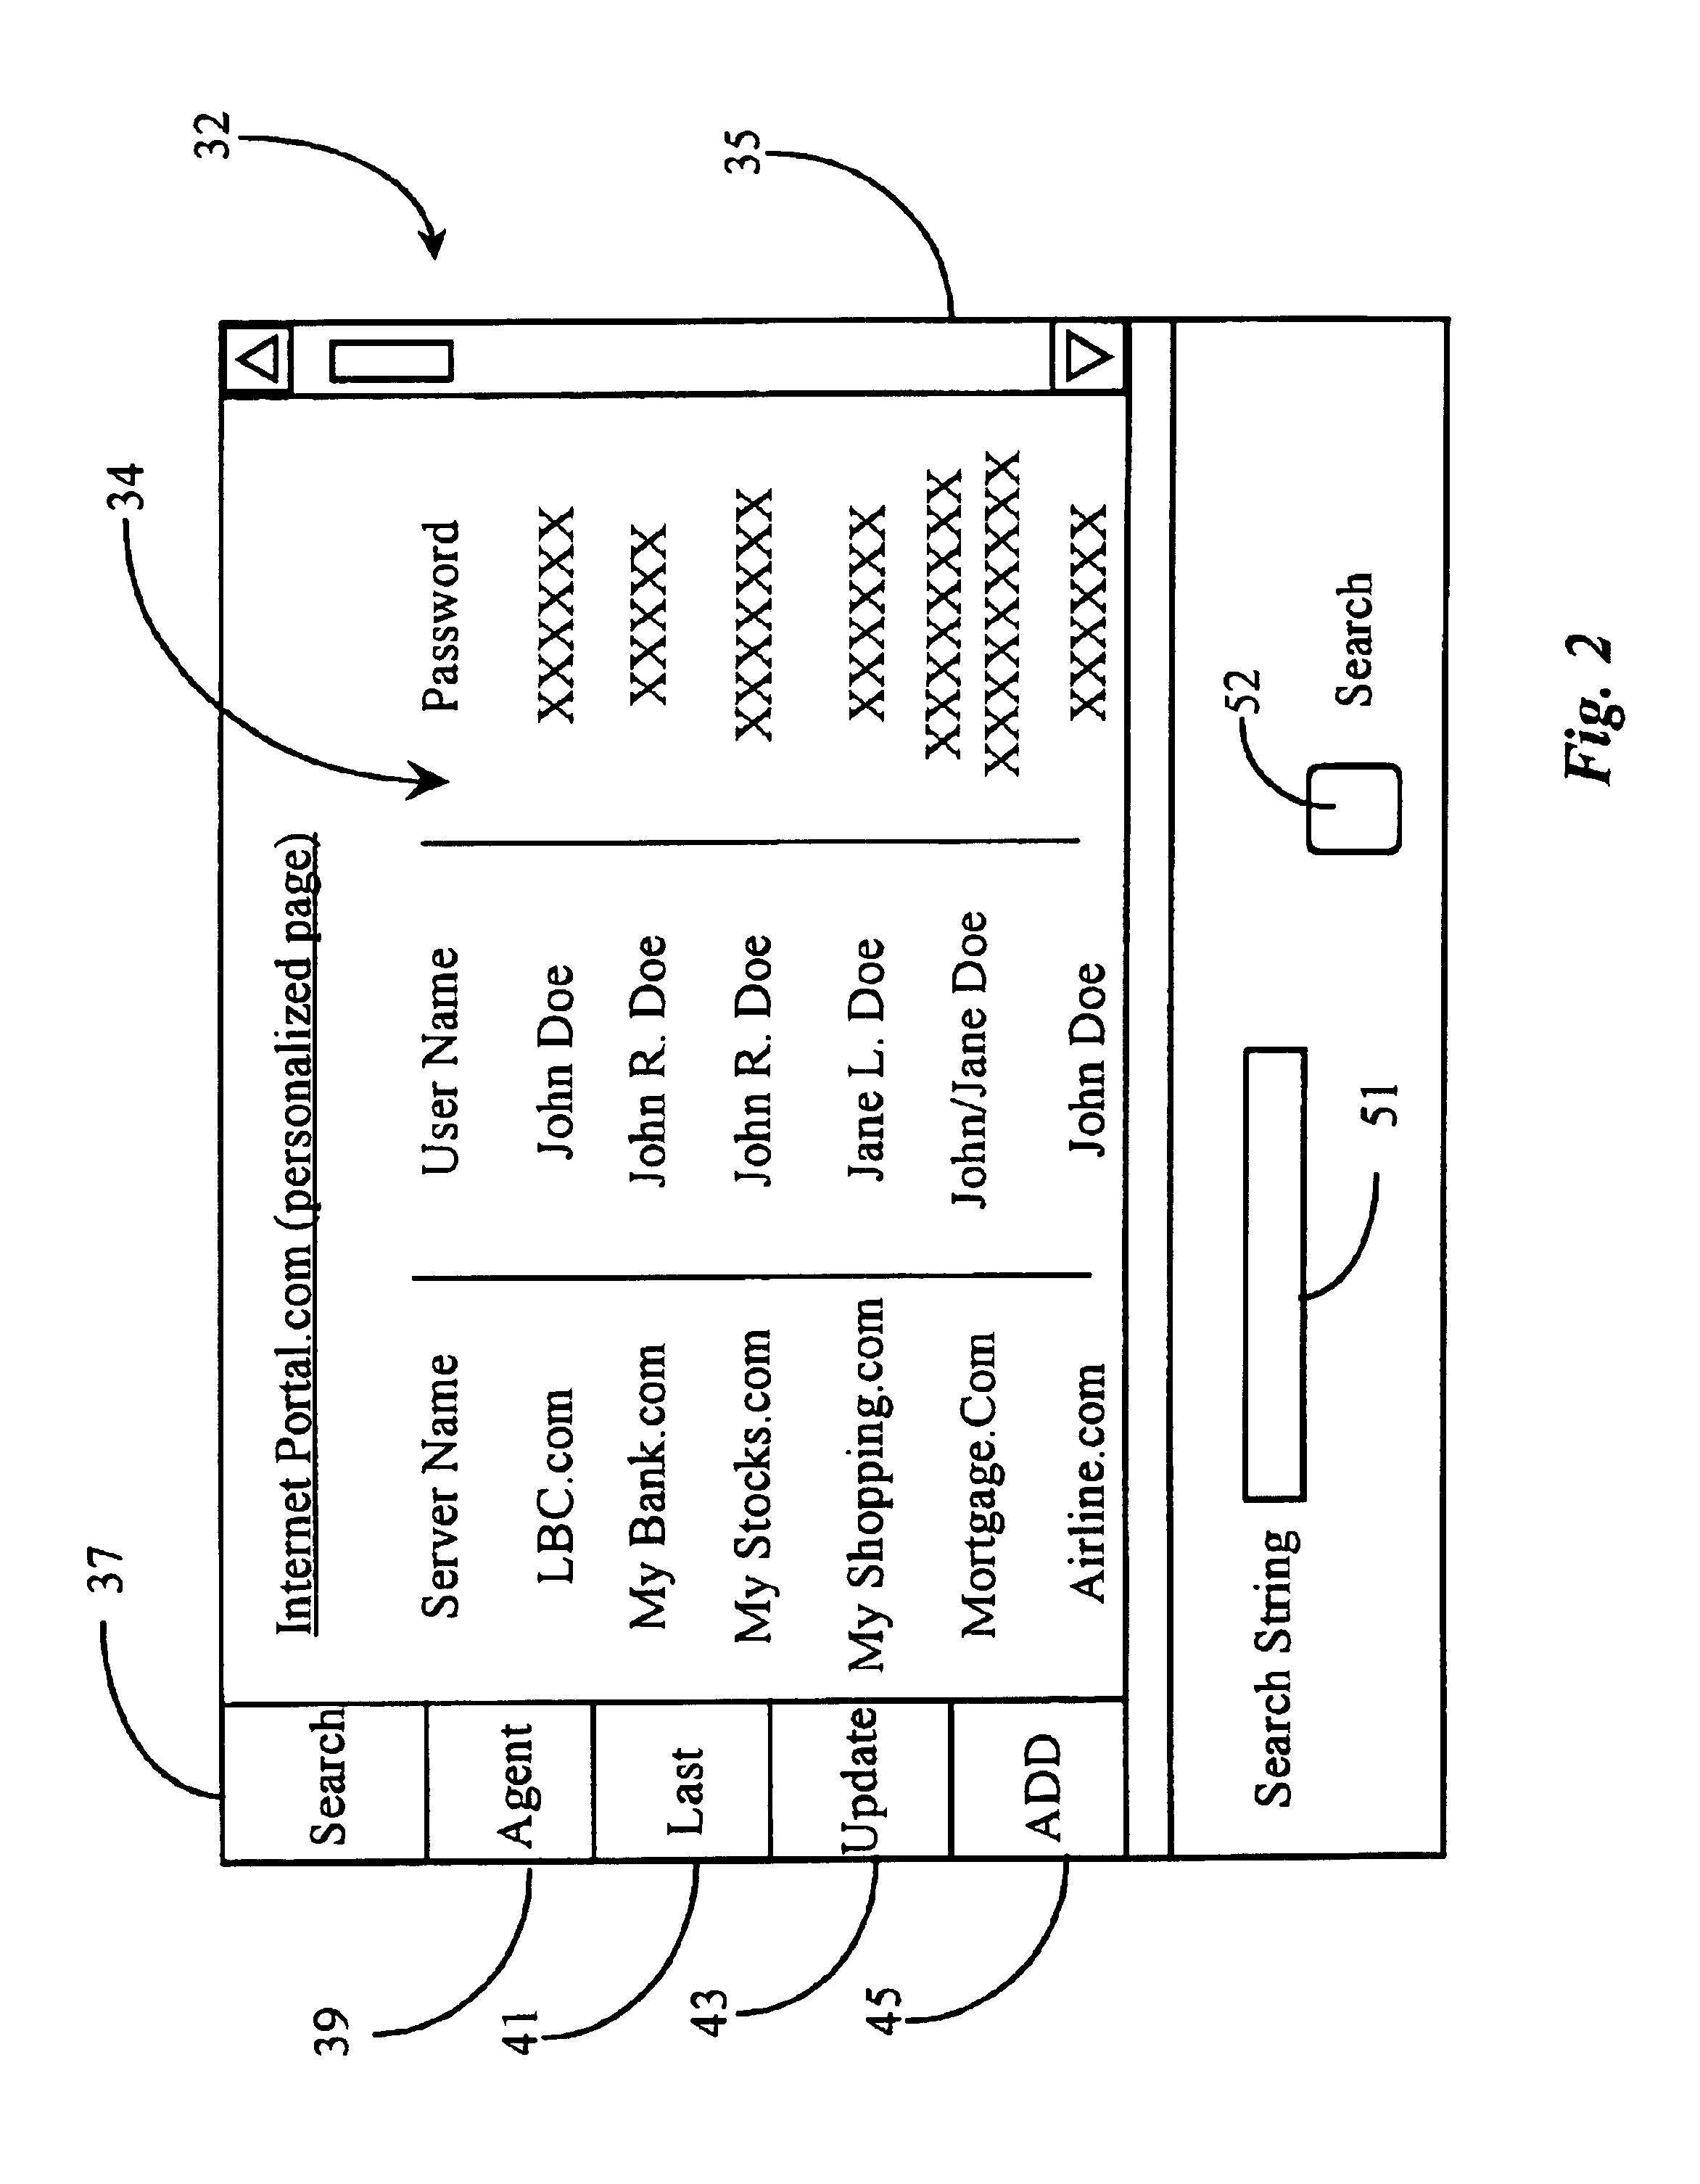 Method and apparatus for tracking functional states of a web-site and reporting results to web developers